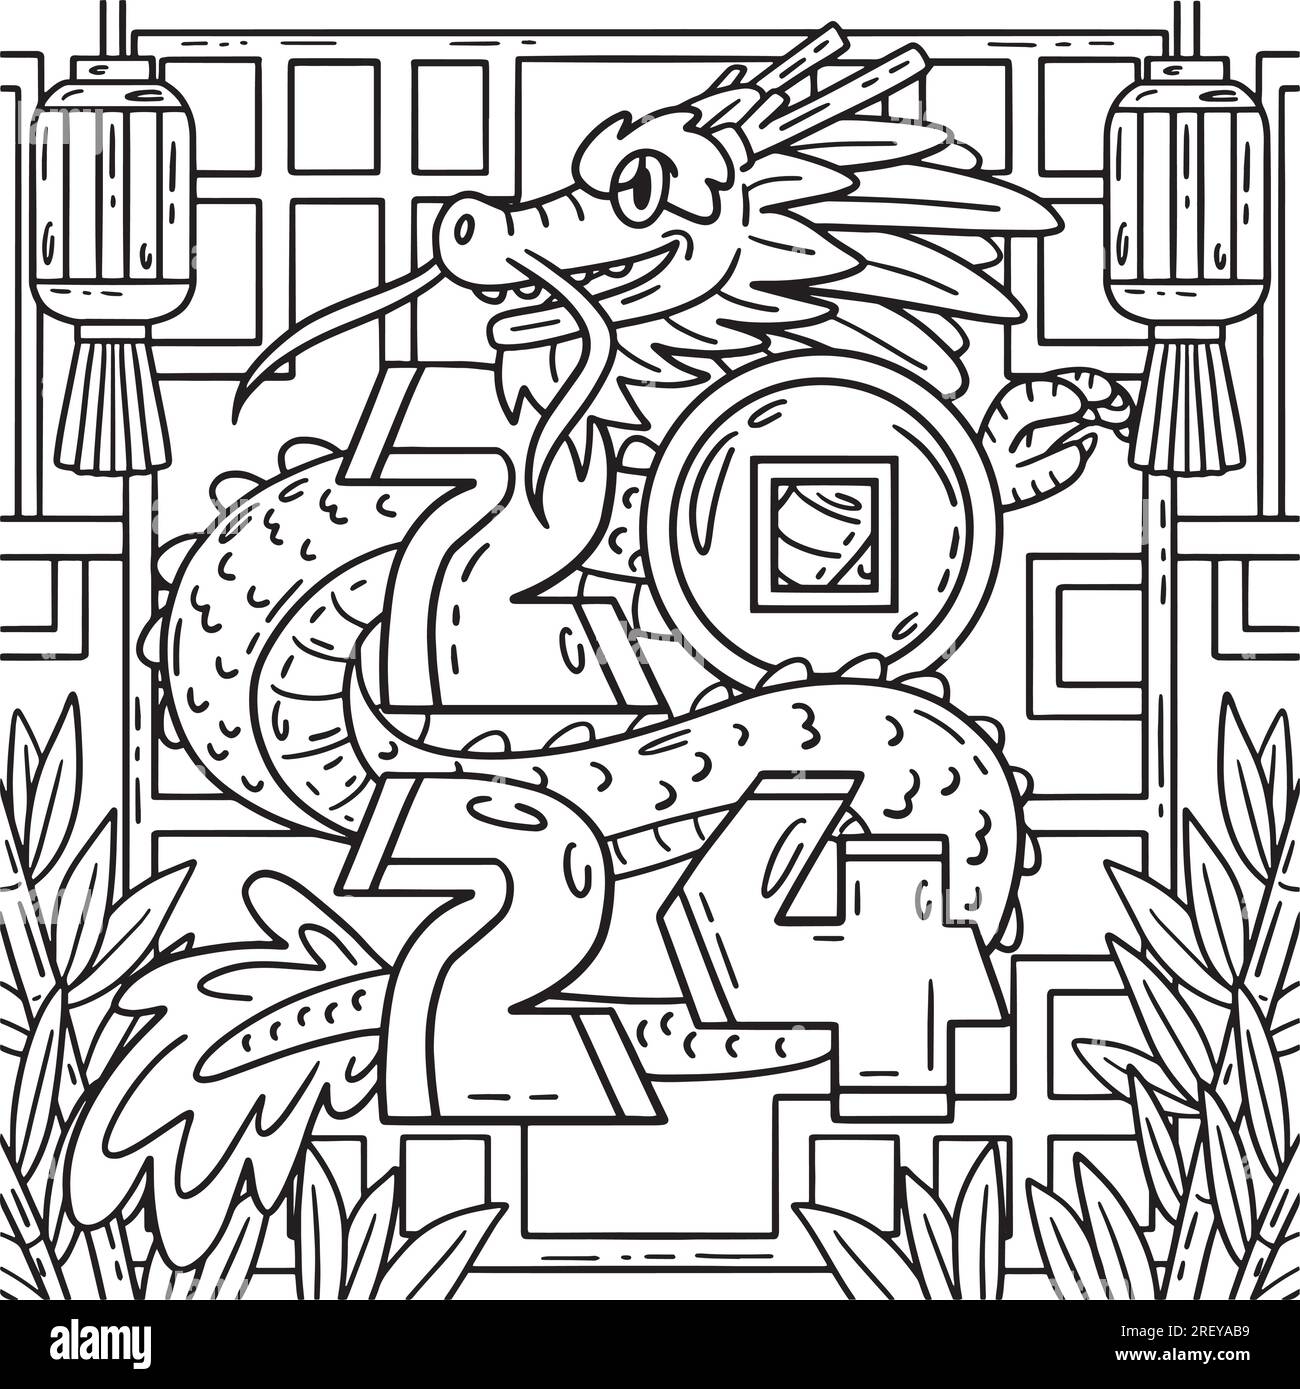 Baby Wood Dragon Fantasy Coloring Page Book, Adults + kids